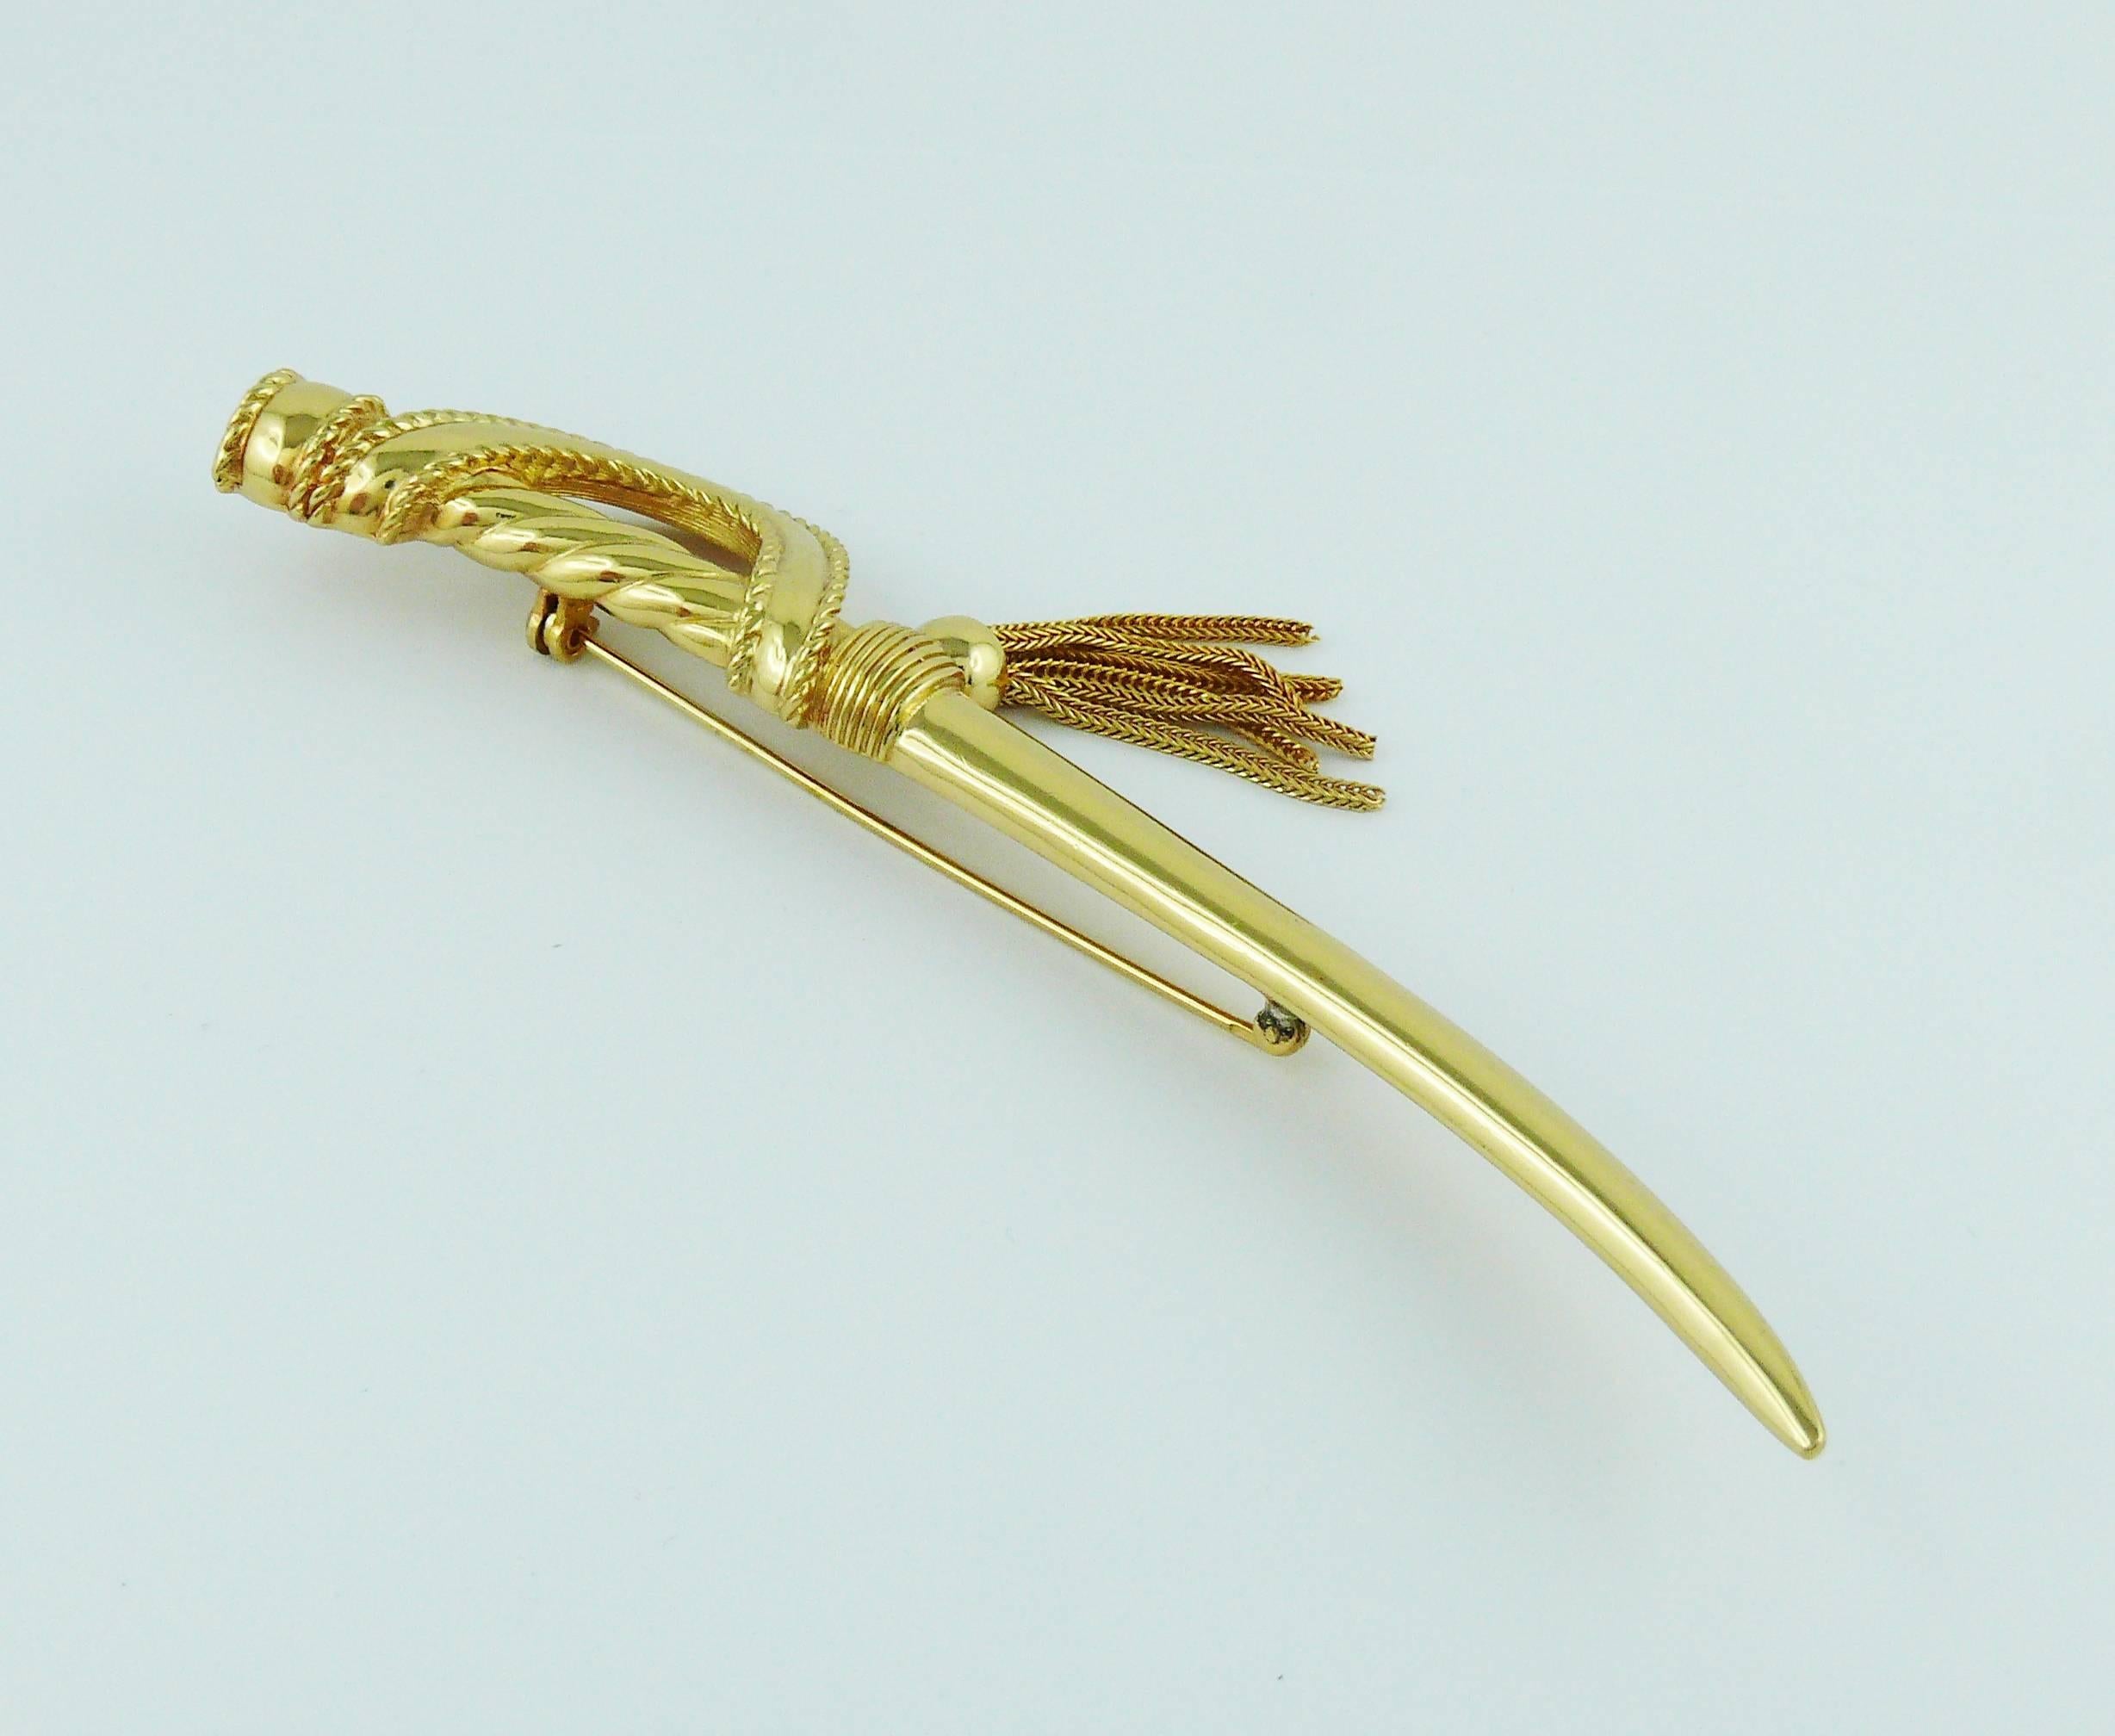 CHRISTIAN DIOR vintage gold toned brooch featuring a saber sword with tassel detail.

Marked CHR. DIOR ©.

Indicative measurements : length approx. 12 cm (4.72 inches).

JEWELRY CONDITION CHART
- New or never worn : item is in pristine condition